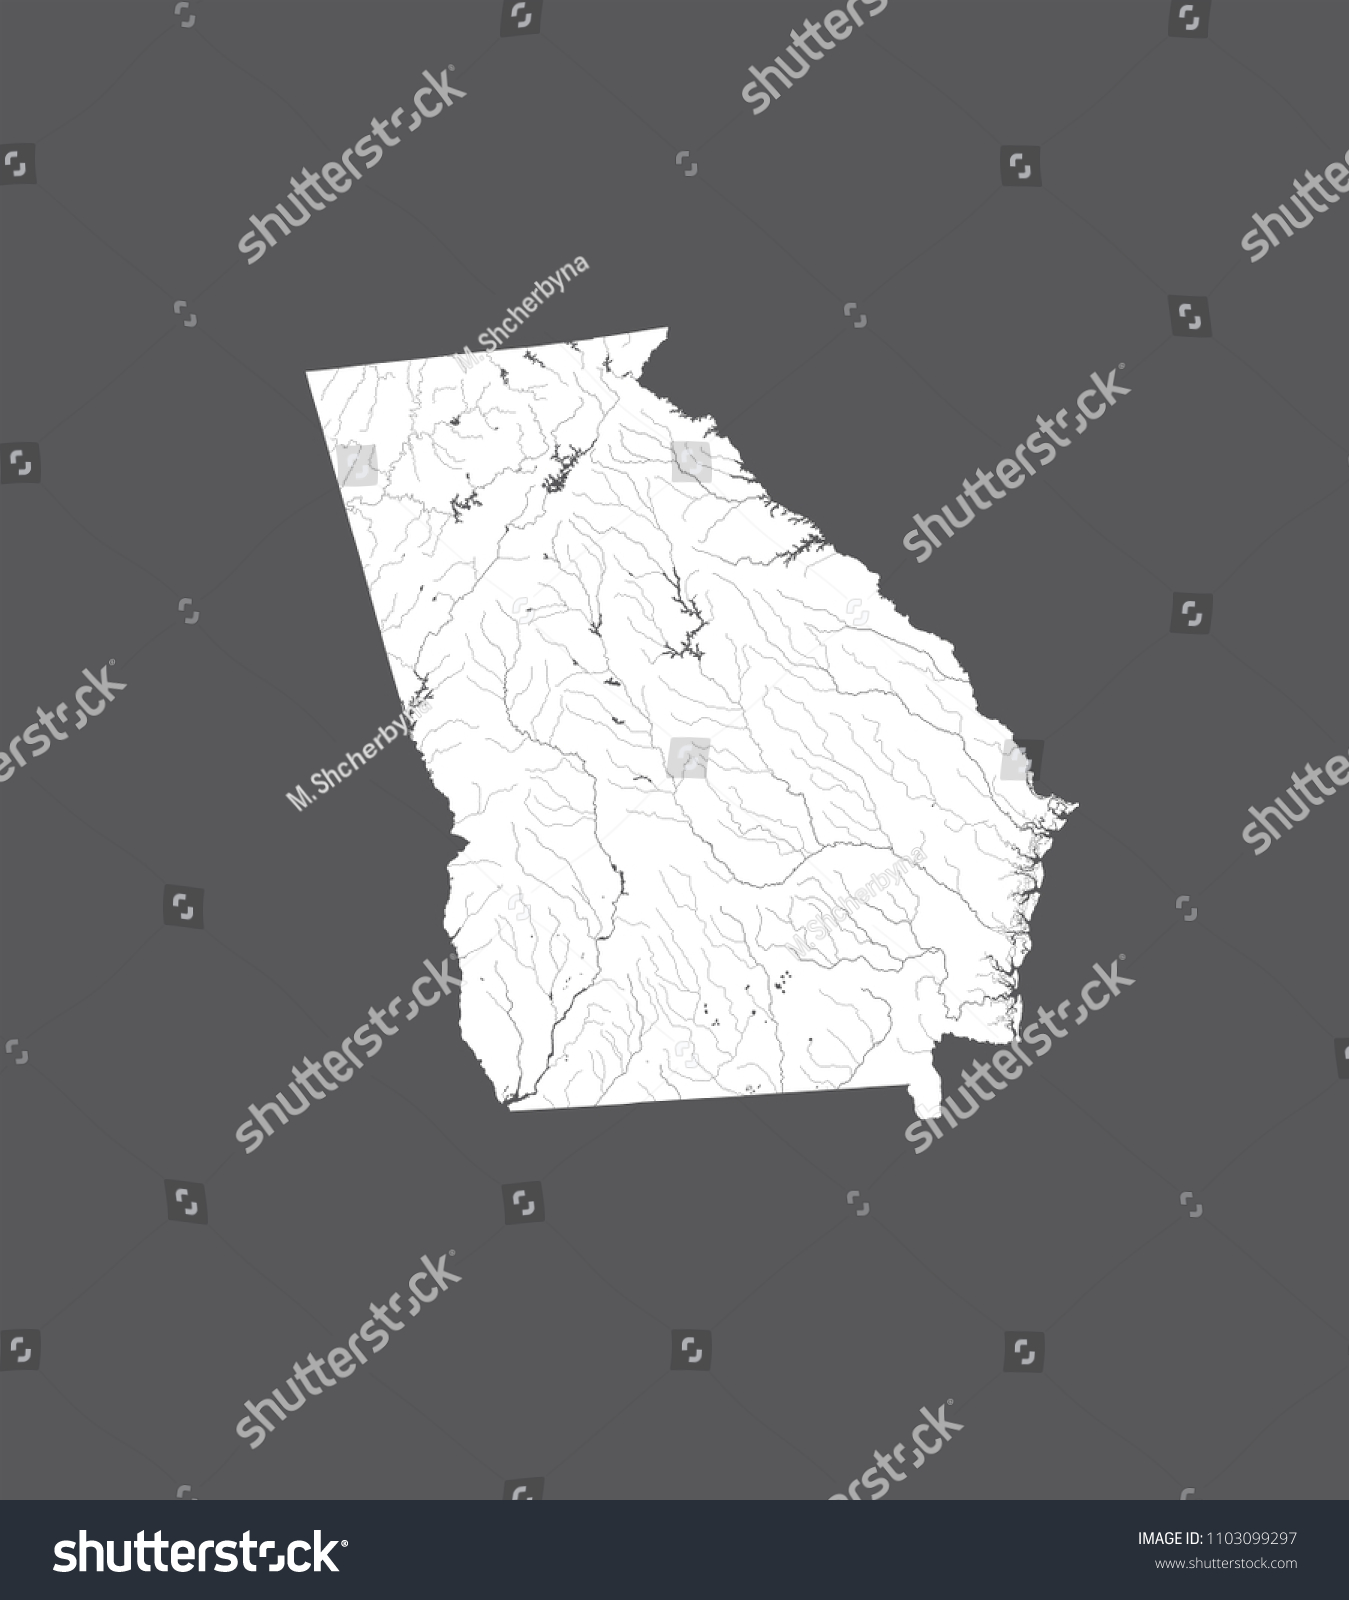 Us States Map Georgia Hand Made Stock Vector Royalty Free 1103099297